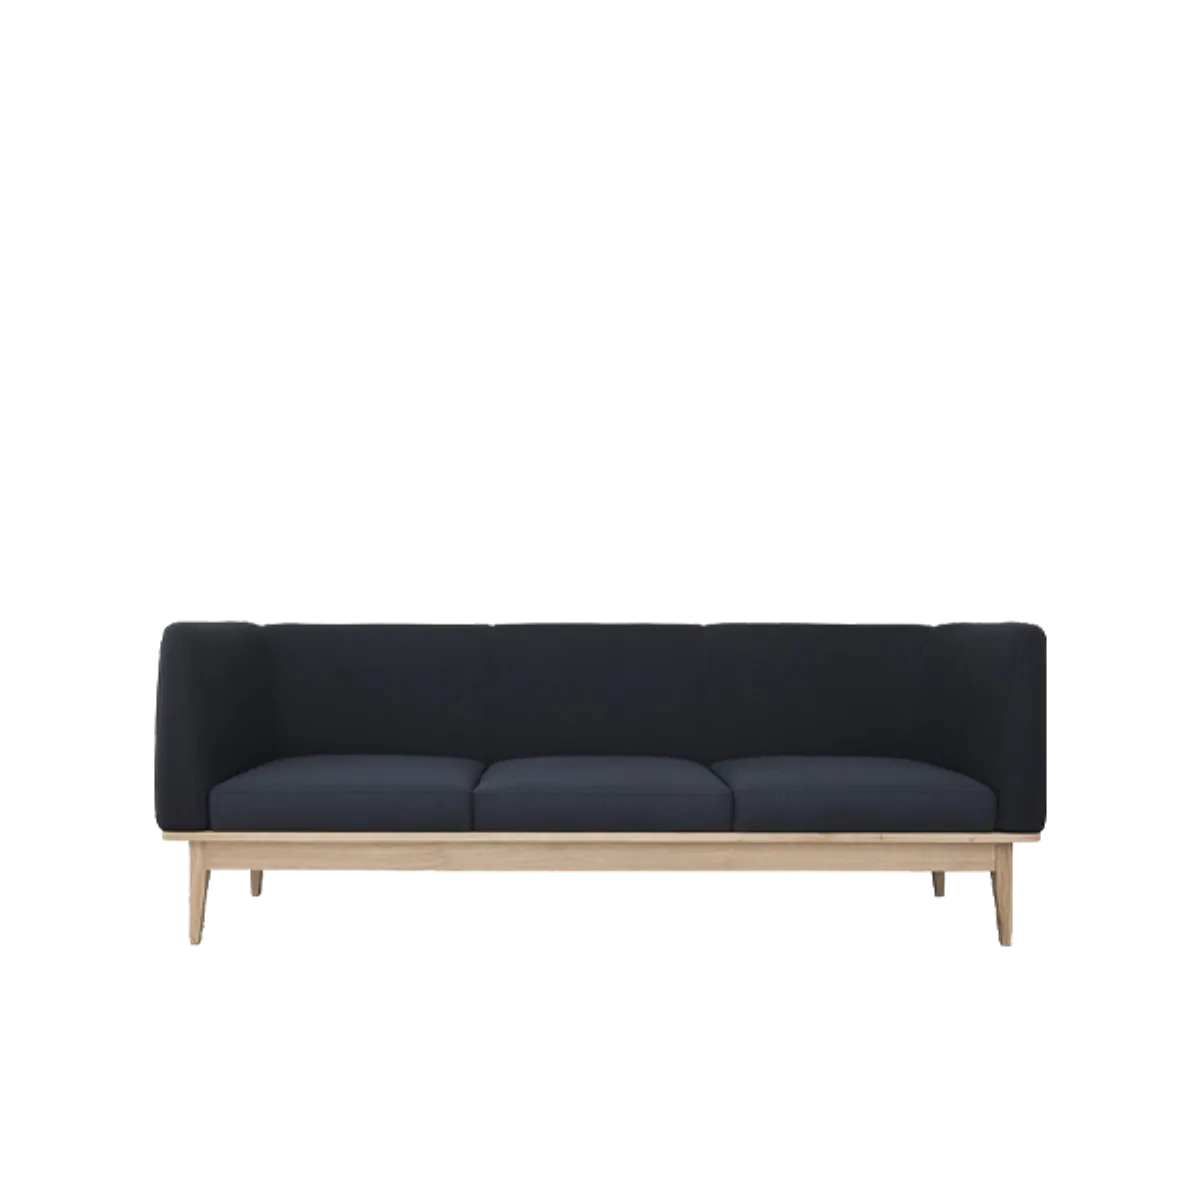 Susette sofa Inside Out Contracts